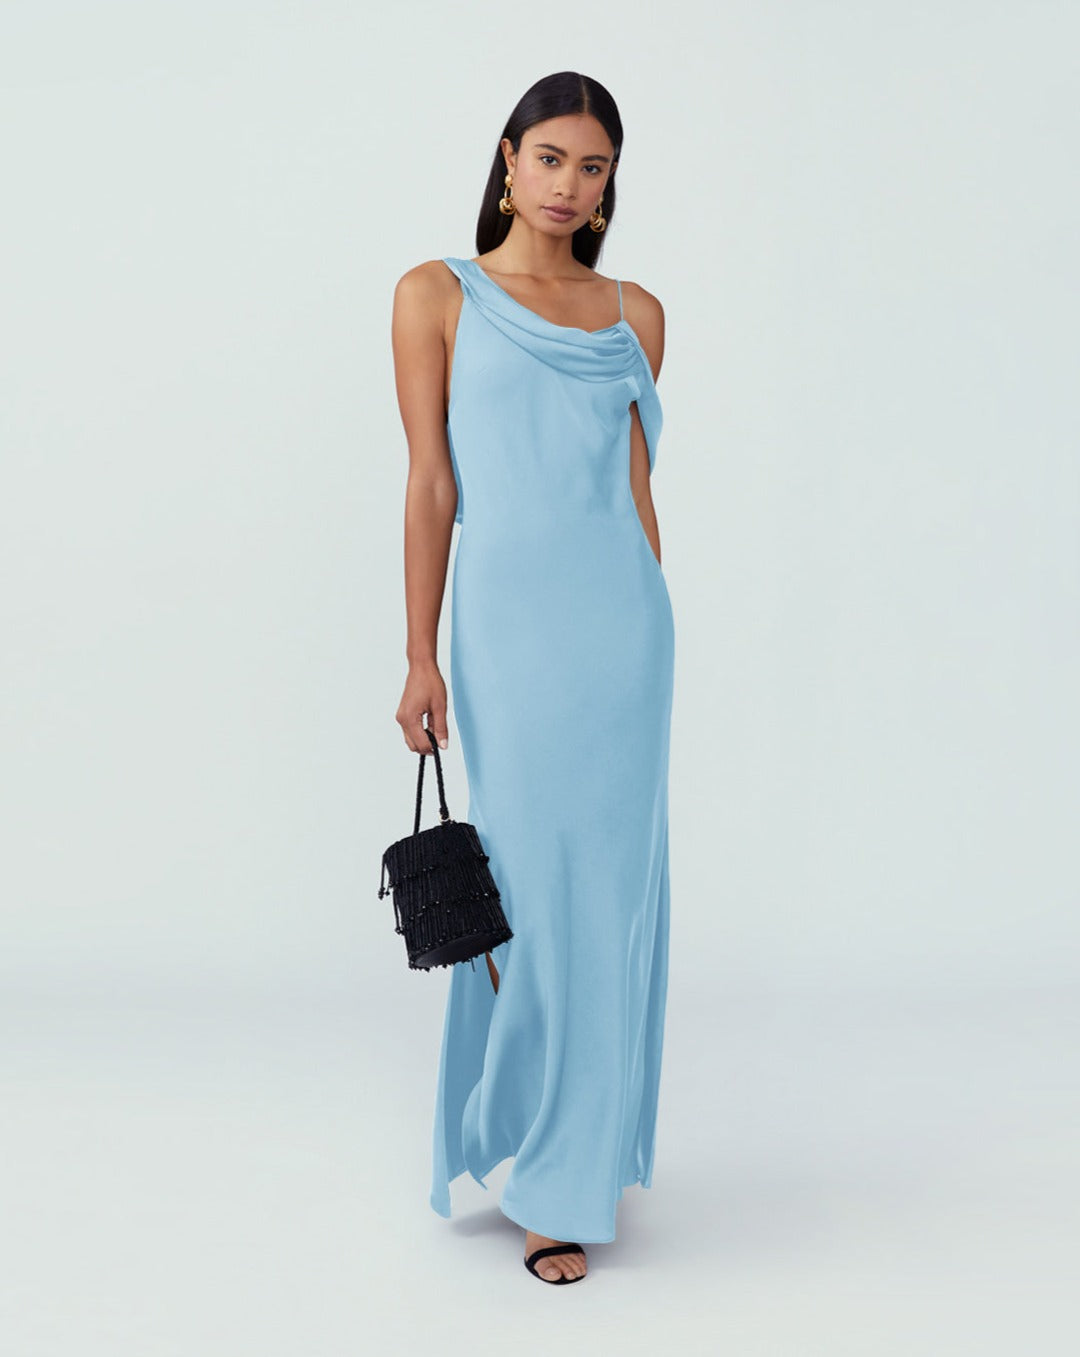 Rosabel Cowl Neck Satin Gown with Spaghetti Straps